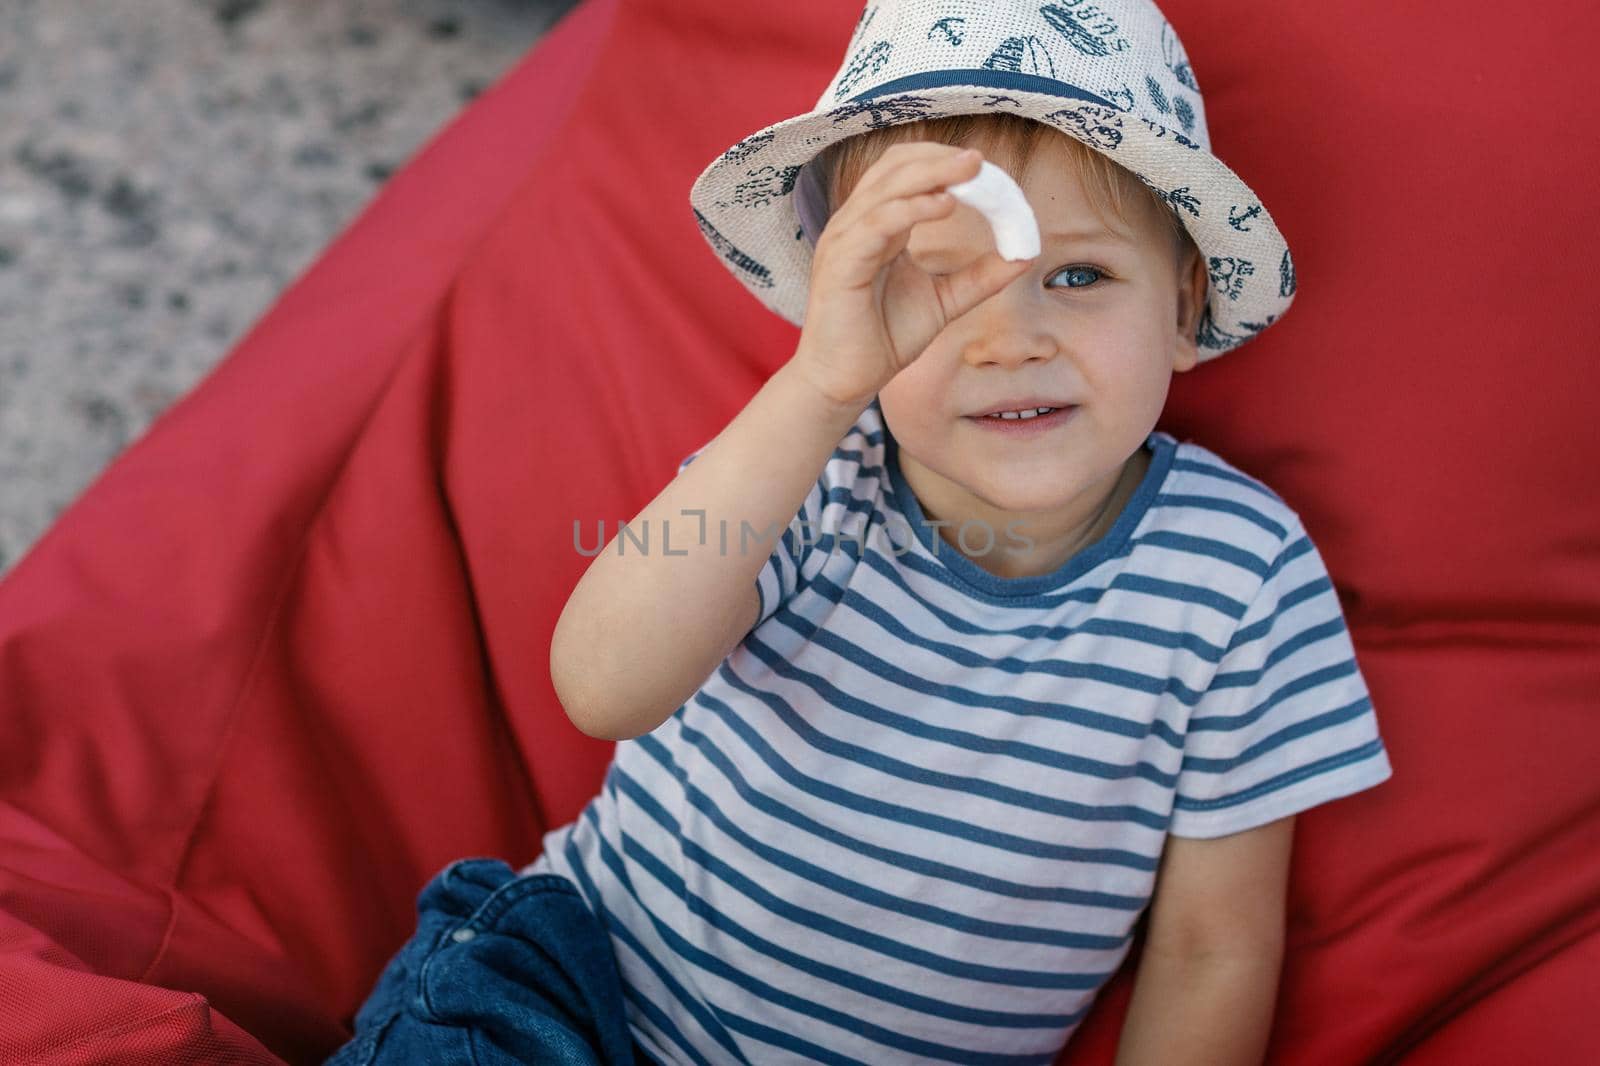 A little boy in a striped shirt and hat on a red background.